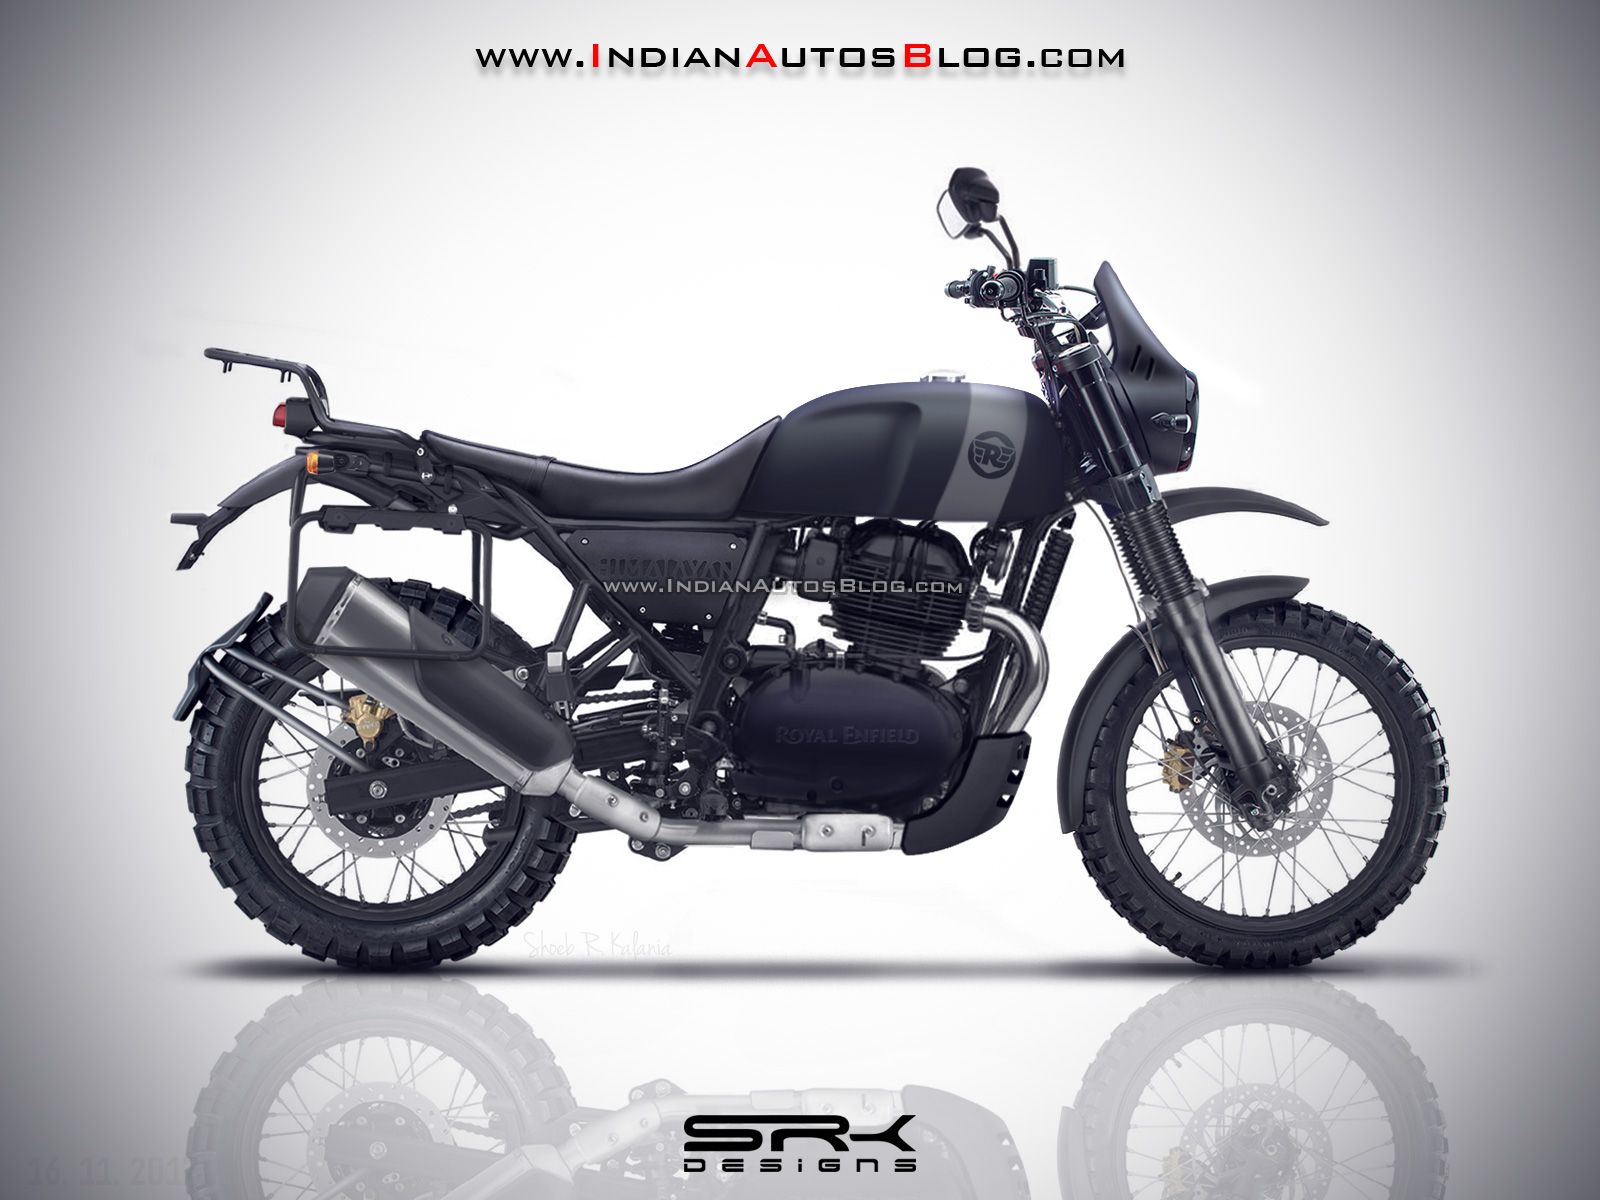 Upcoming Royal Enfield Motorcycles To Be Launched In The Mid Term